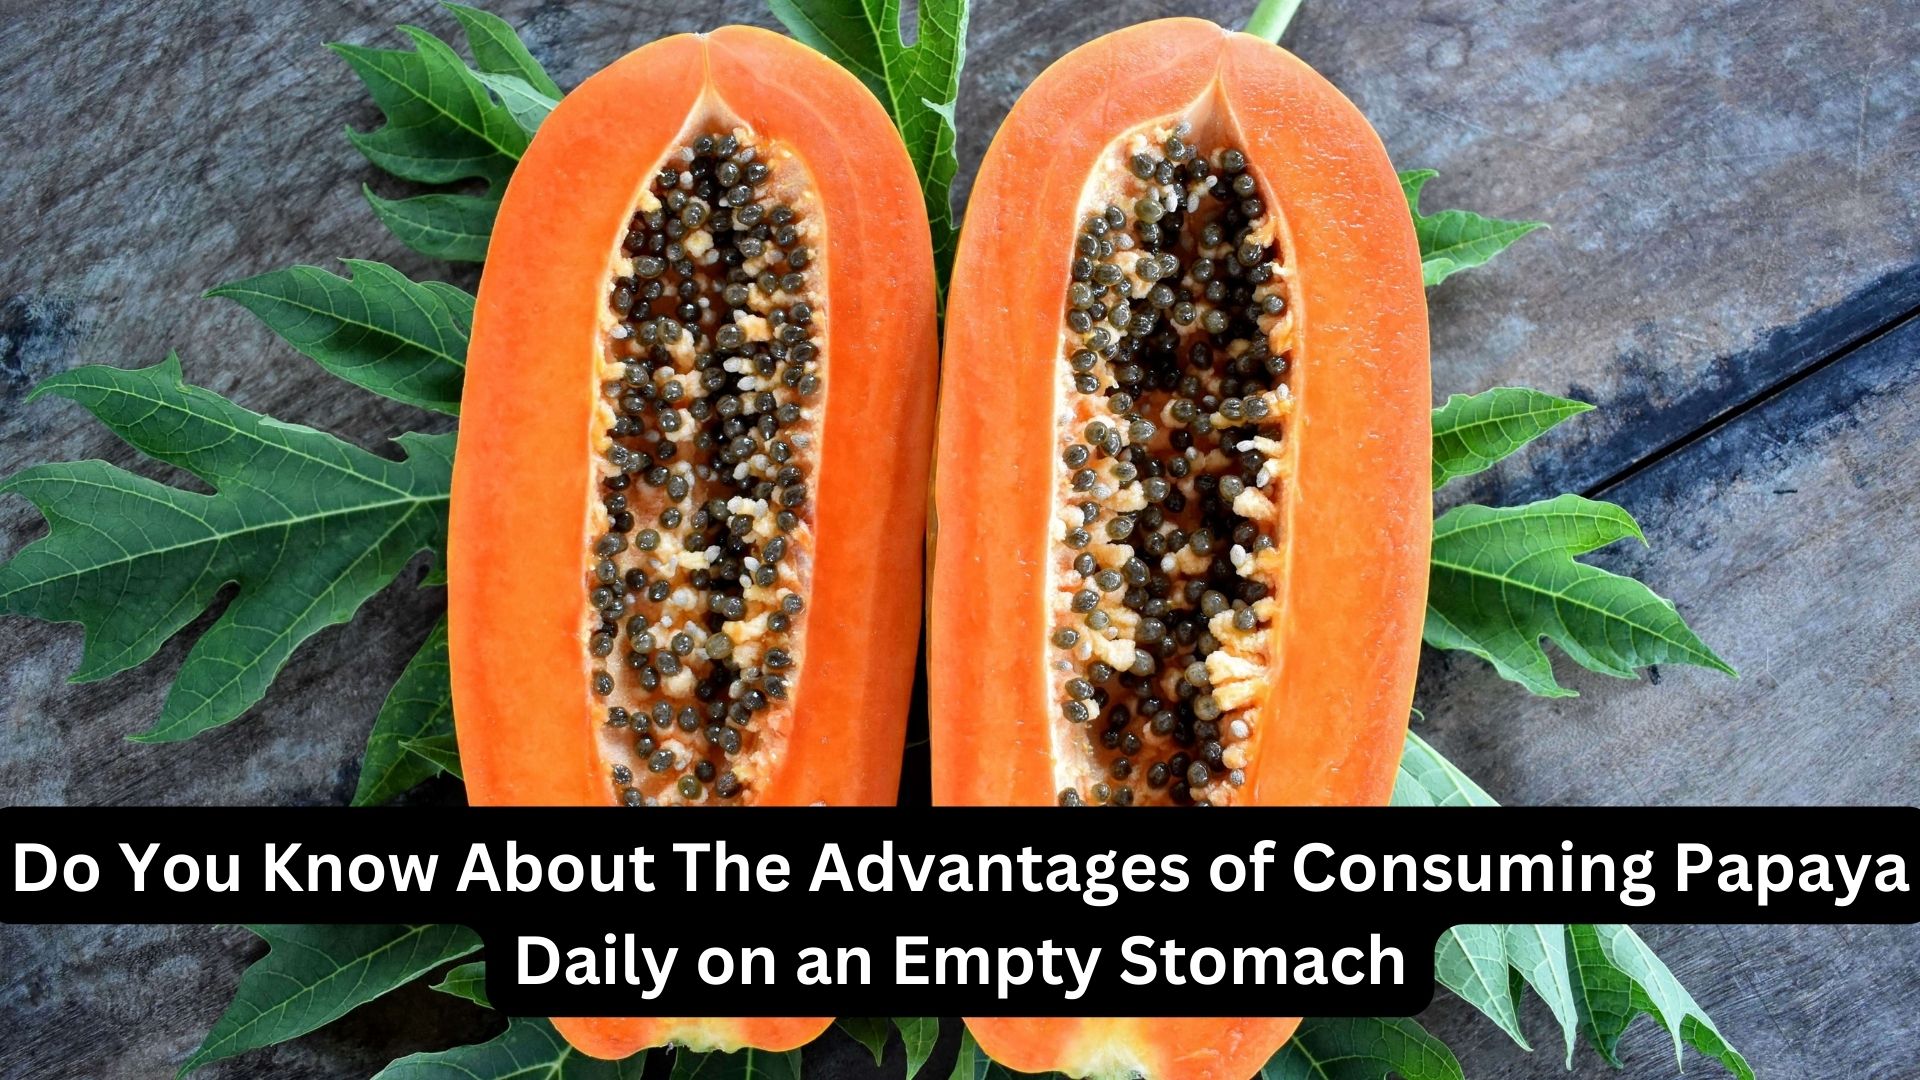 Do You Know About The Advantages of Consuming Papaya Daily on an Empty Stomach